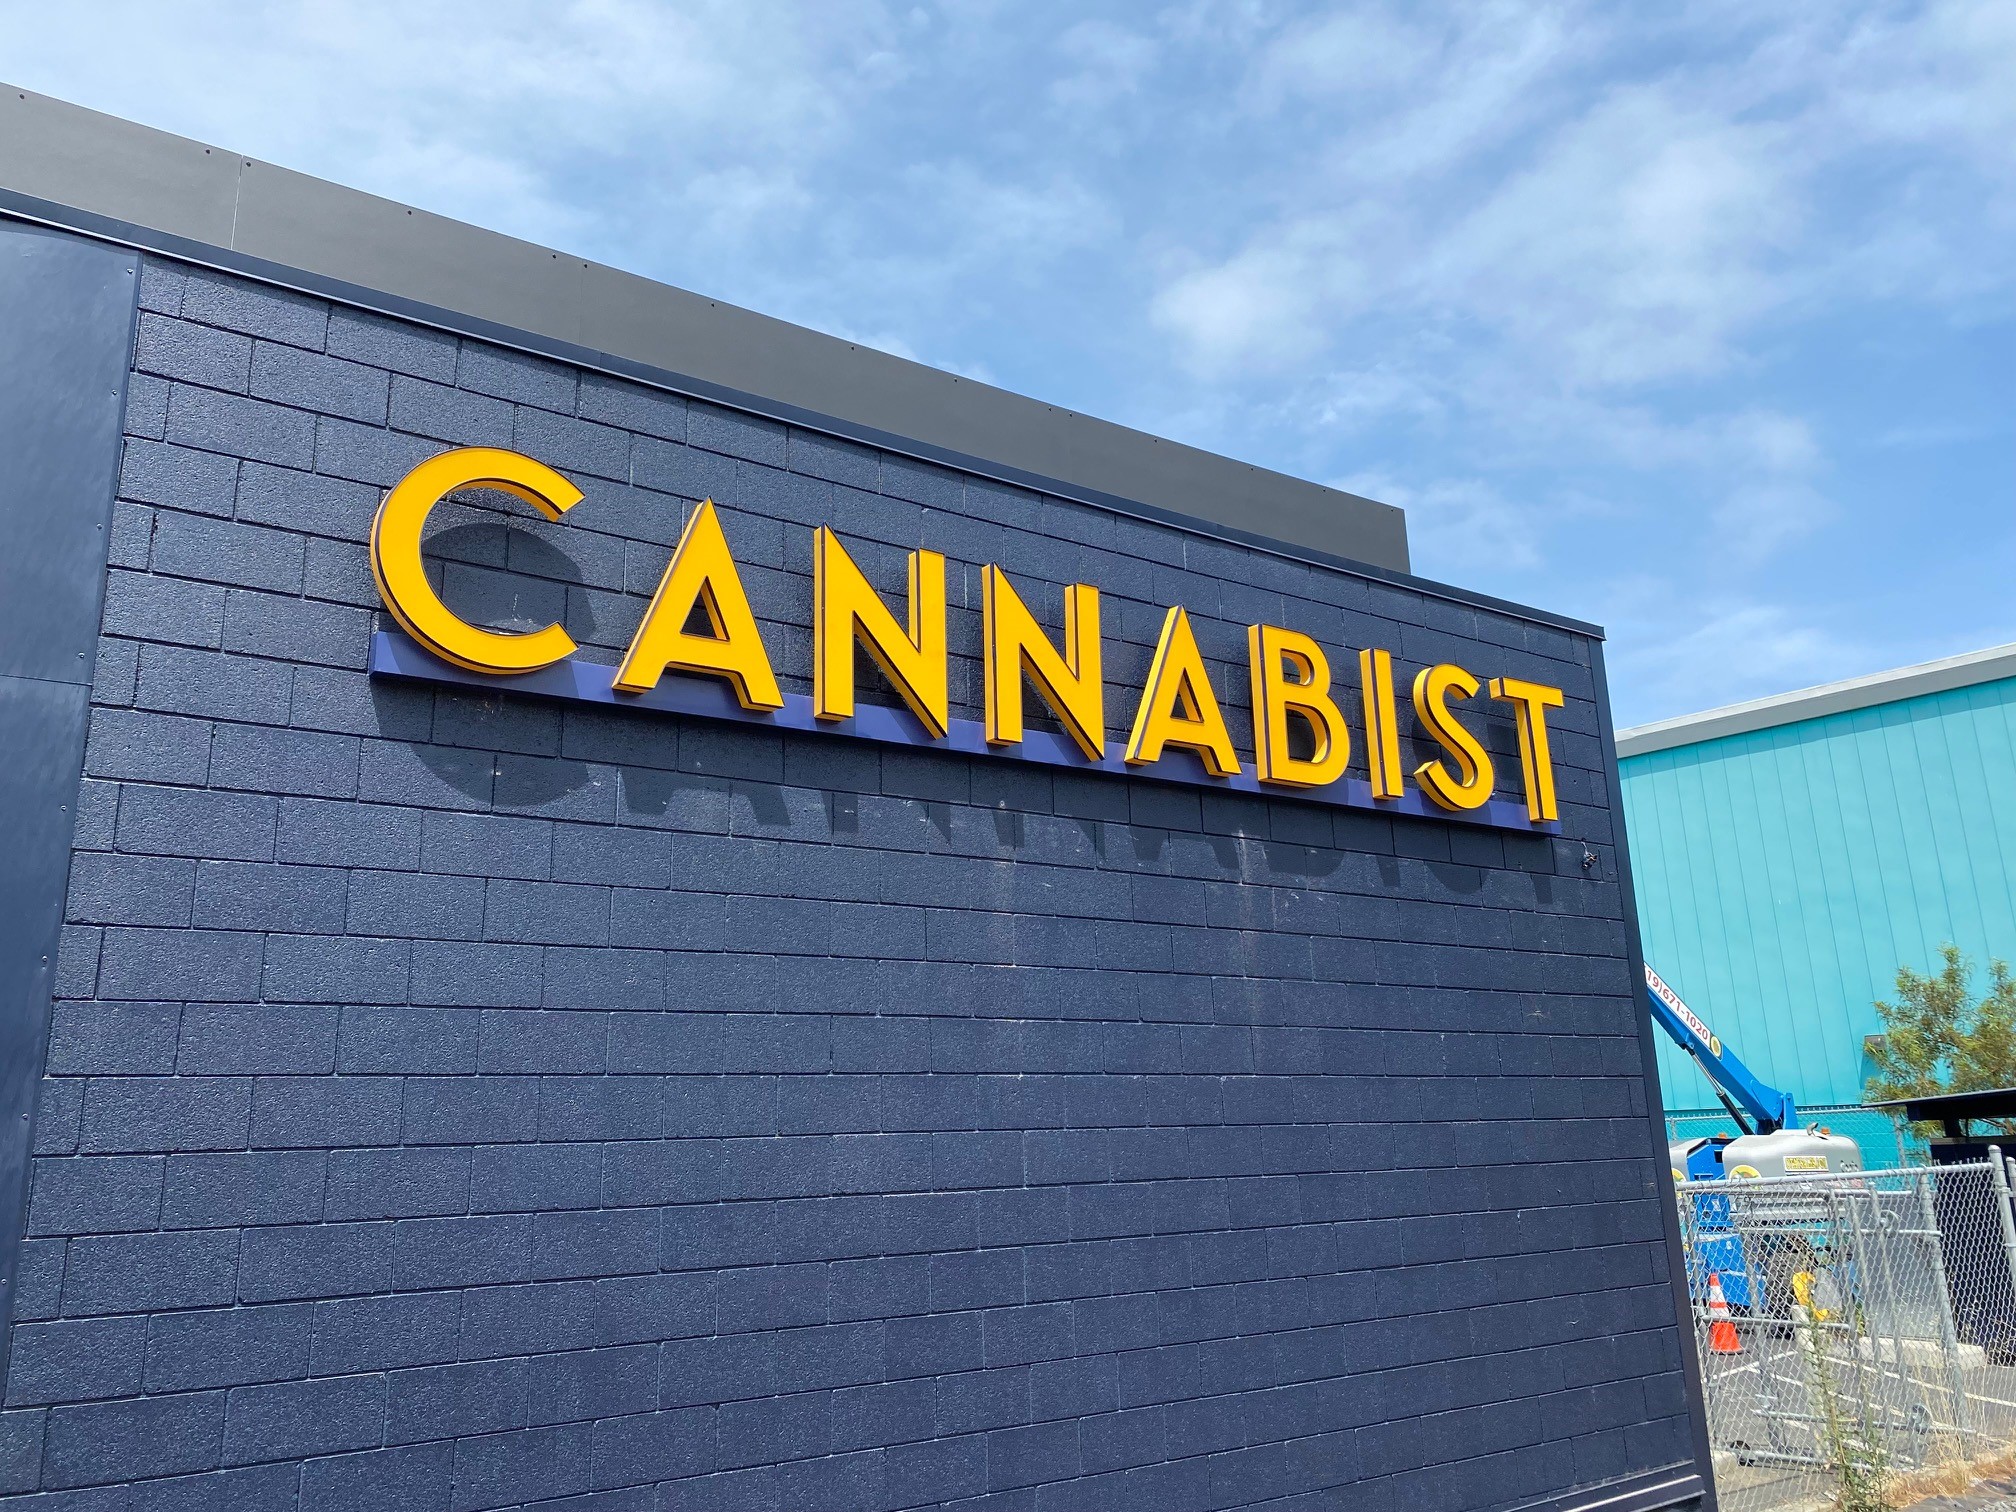 Channel Letter sign installation in San Diego CA